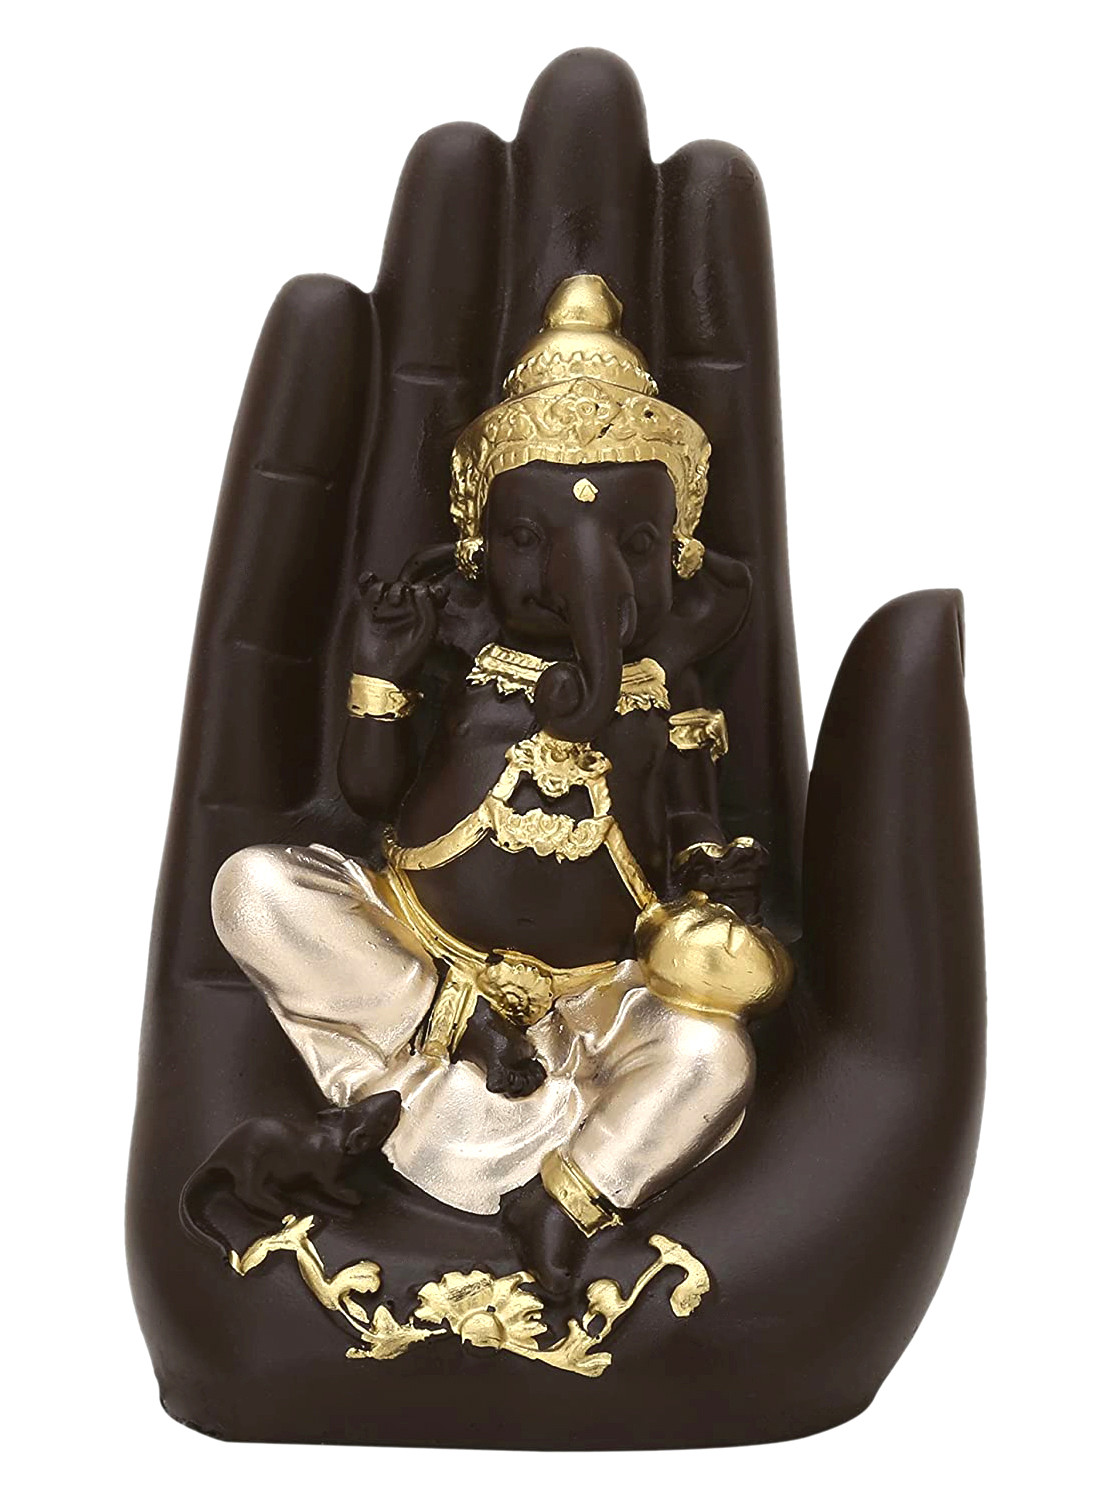 Kuber Industries Polyresin Handcrafted Palm Ganesha Idol Showpiece for Home Decor (Brown)